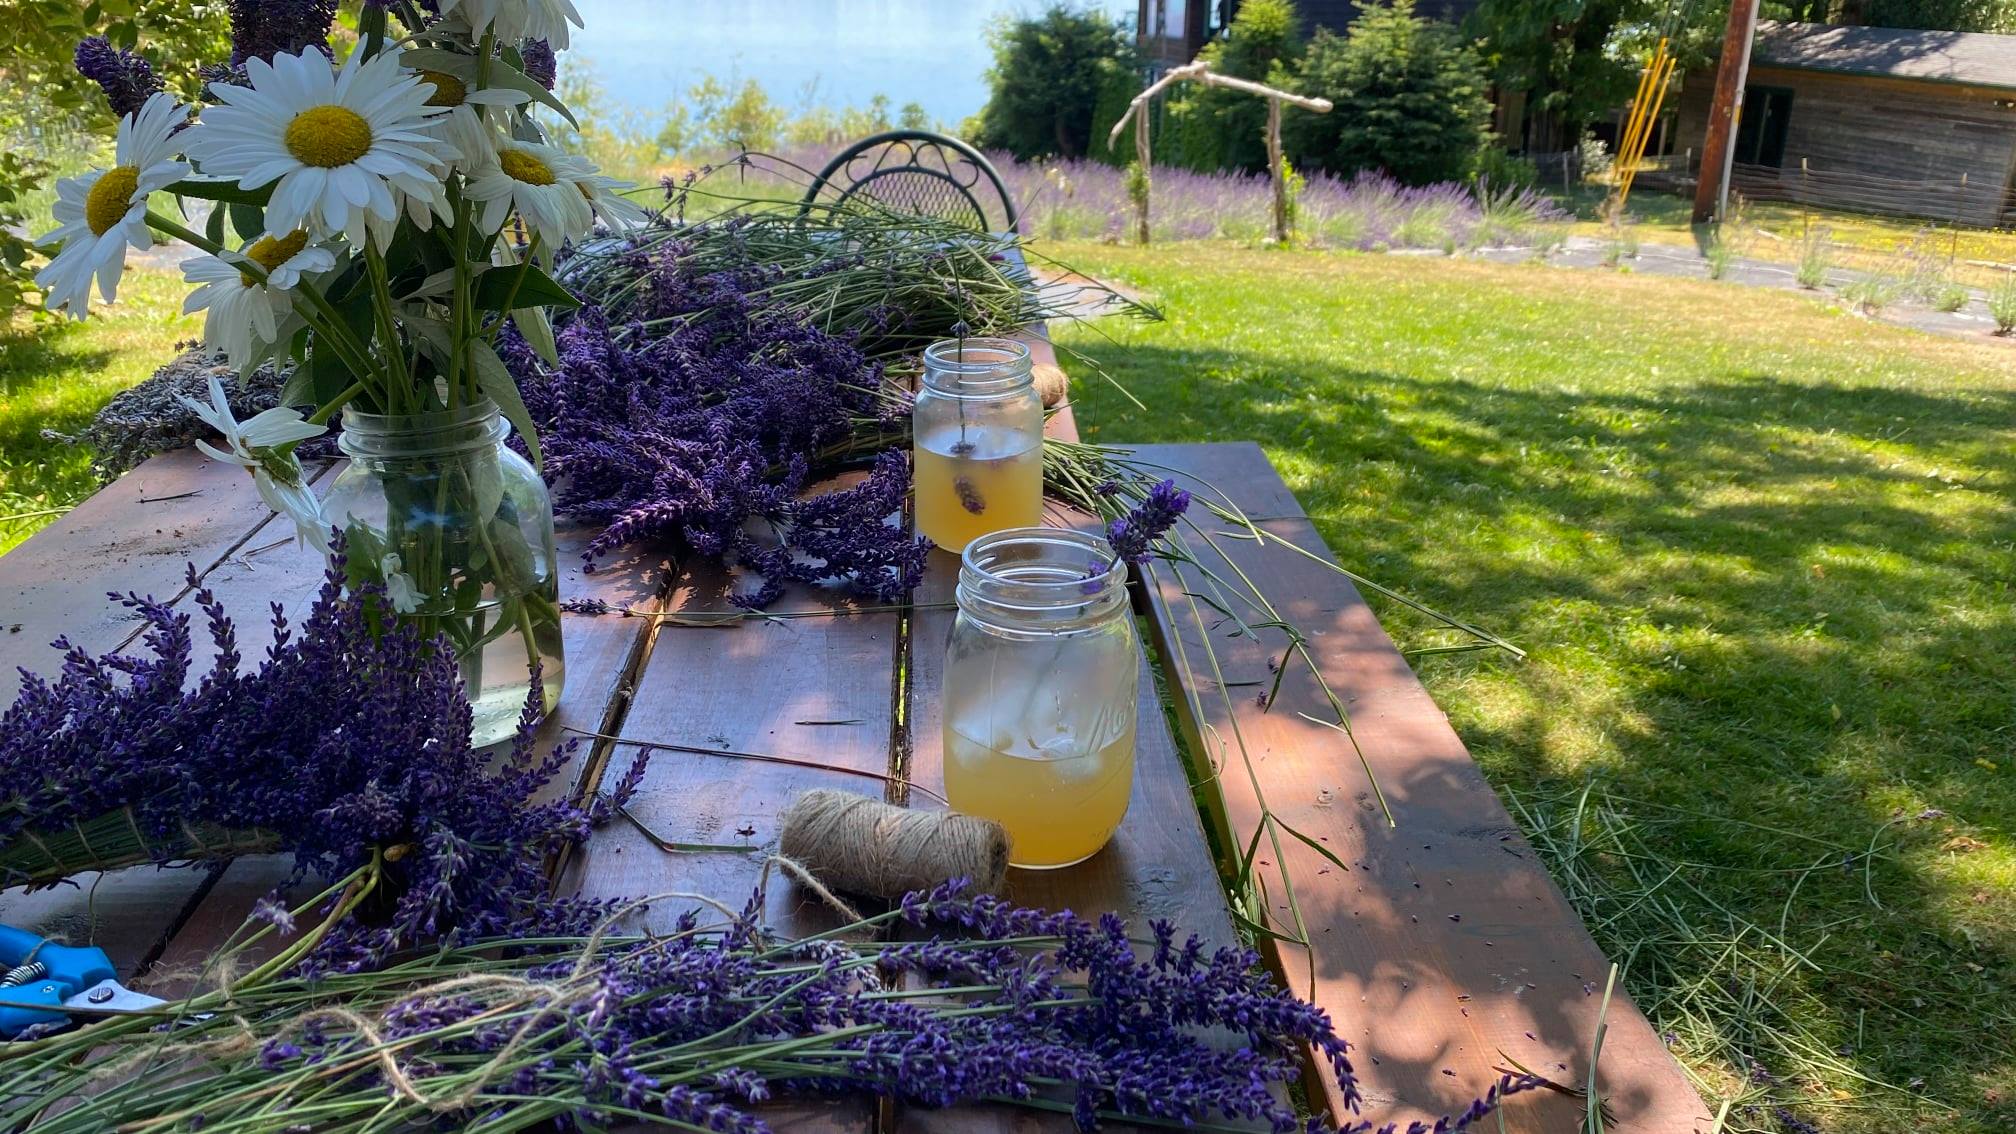 picnic table with lavender bouquets and wreath-making supplies like ribbon at Schirm Loop Homestead Lavender Farm